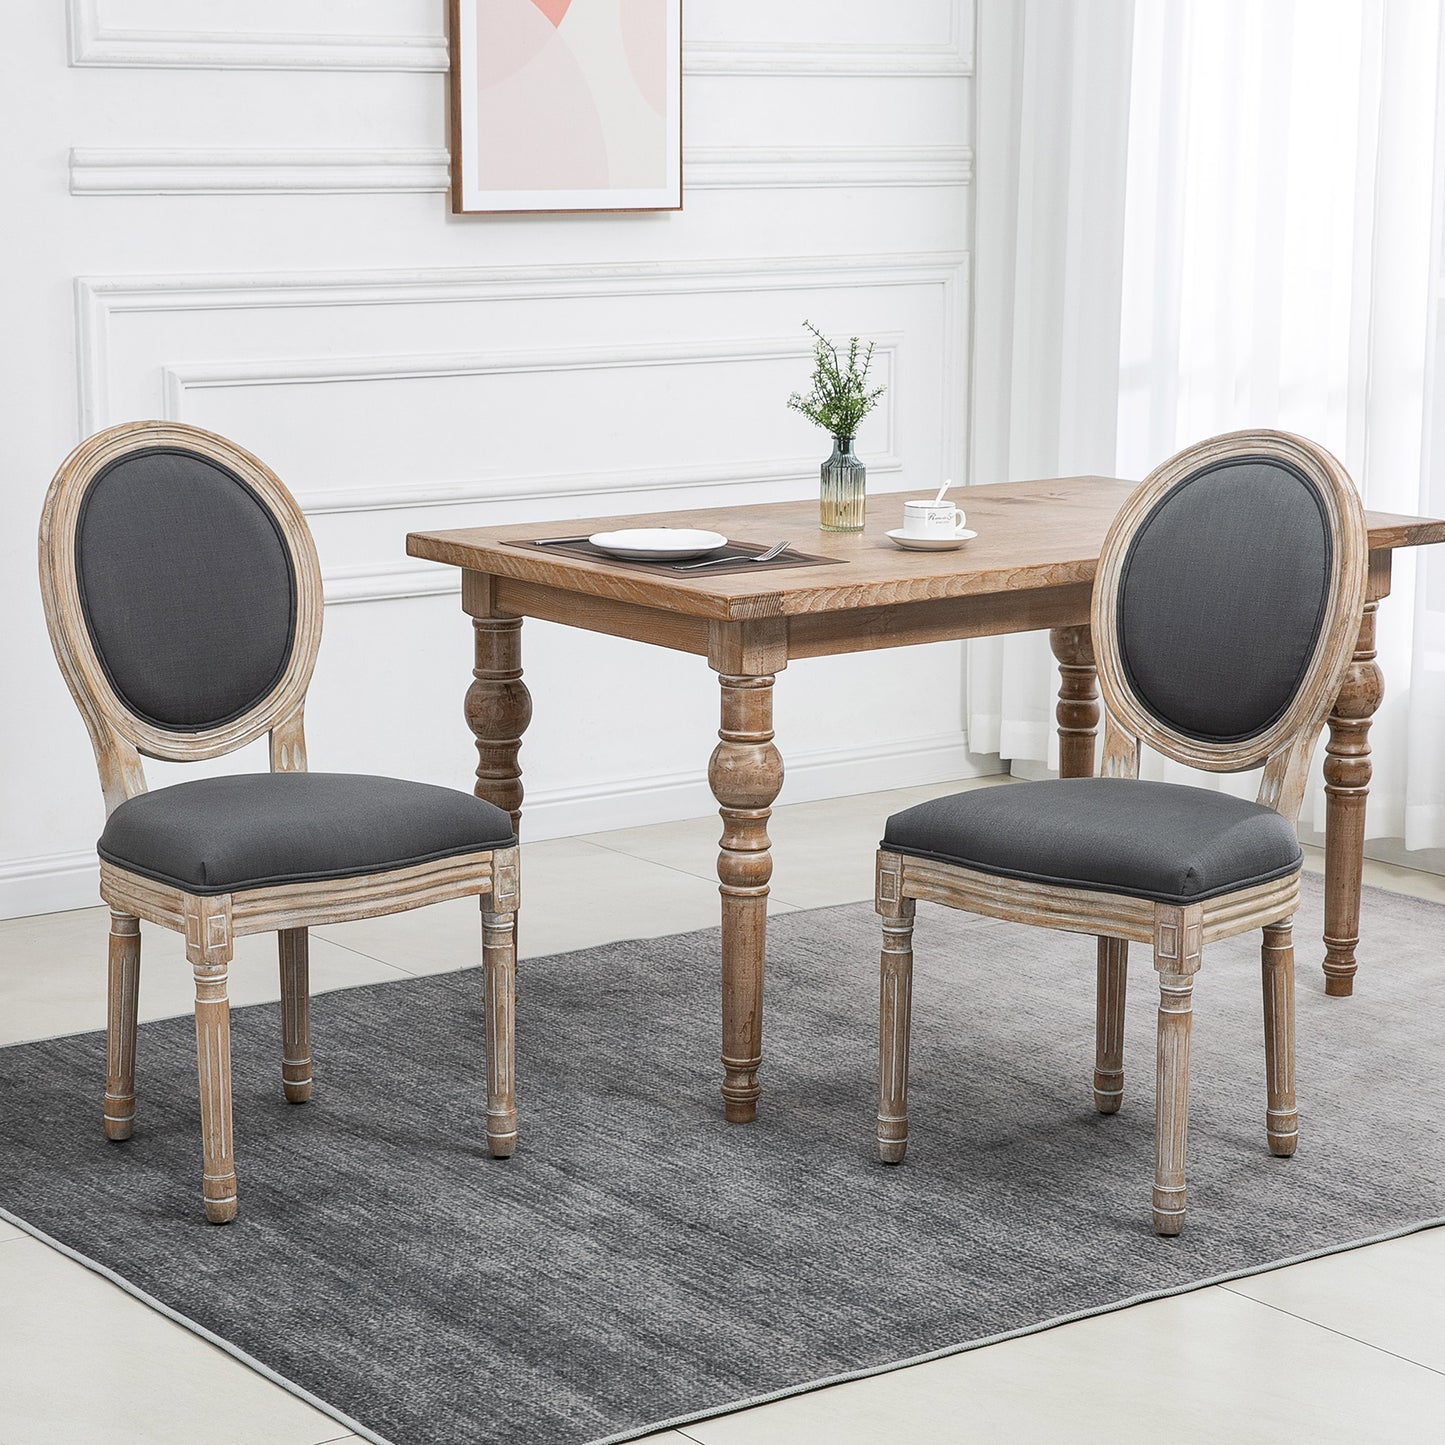 HOMCOM Set of 2 French-Style Dining Chairs - Grey